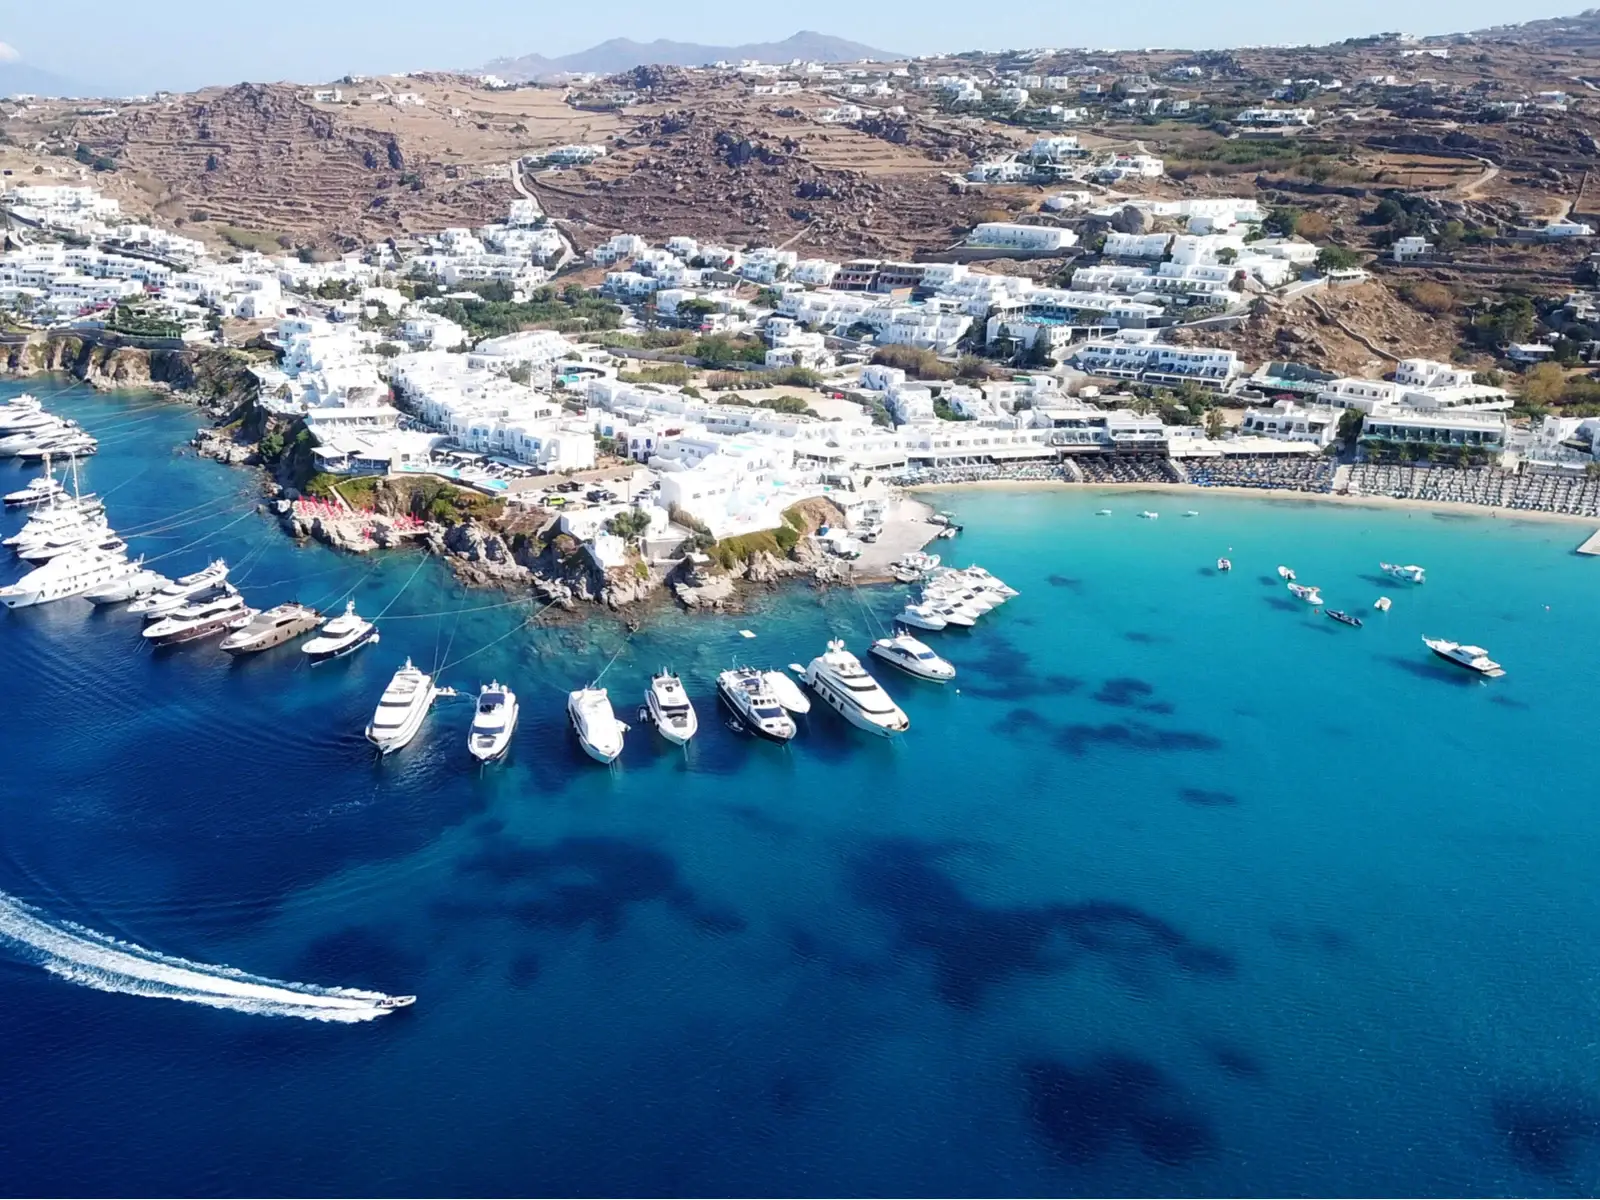 Platys Gialos, Mykonos, one of Greece's best beaches, seen from a drone shot with boats around the coast